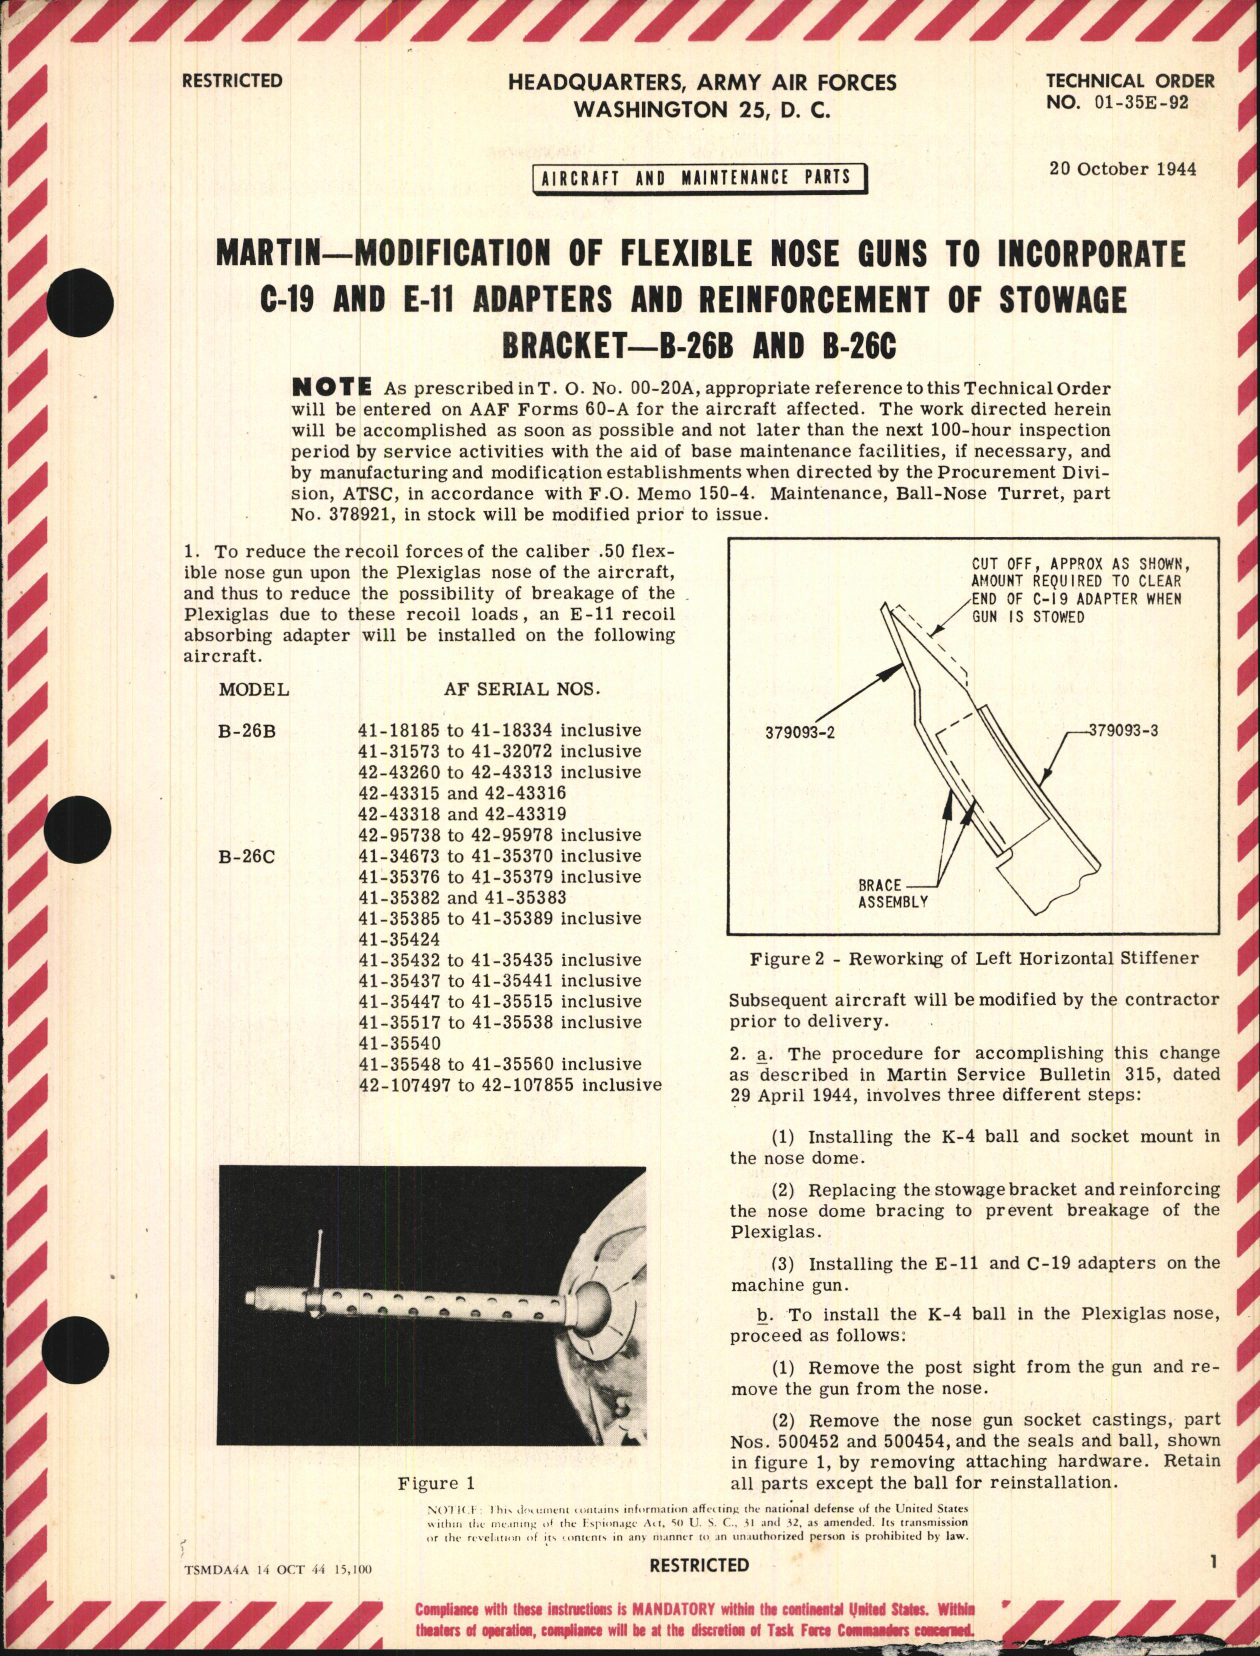 Sample page 1 from AirCorps Library document: Modification of Flexible Nose Guns to Incorporate C-19 and E-11 Adapters and Reinforcement of Stowage Bracket